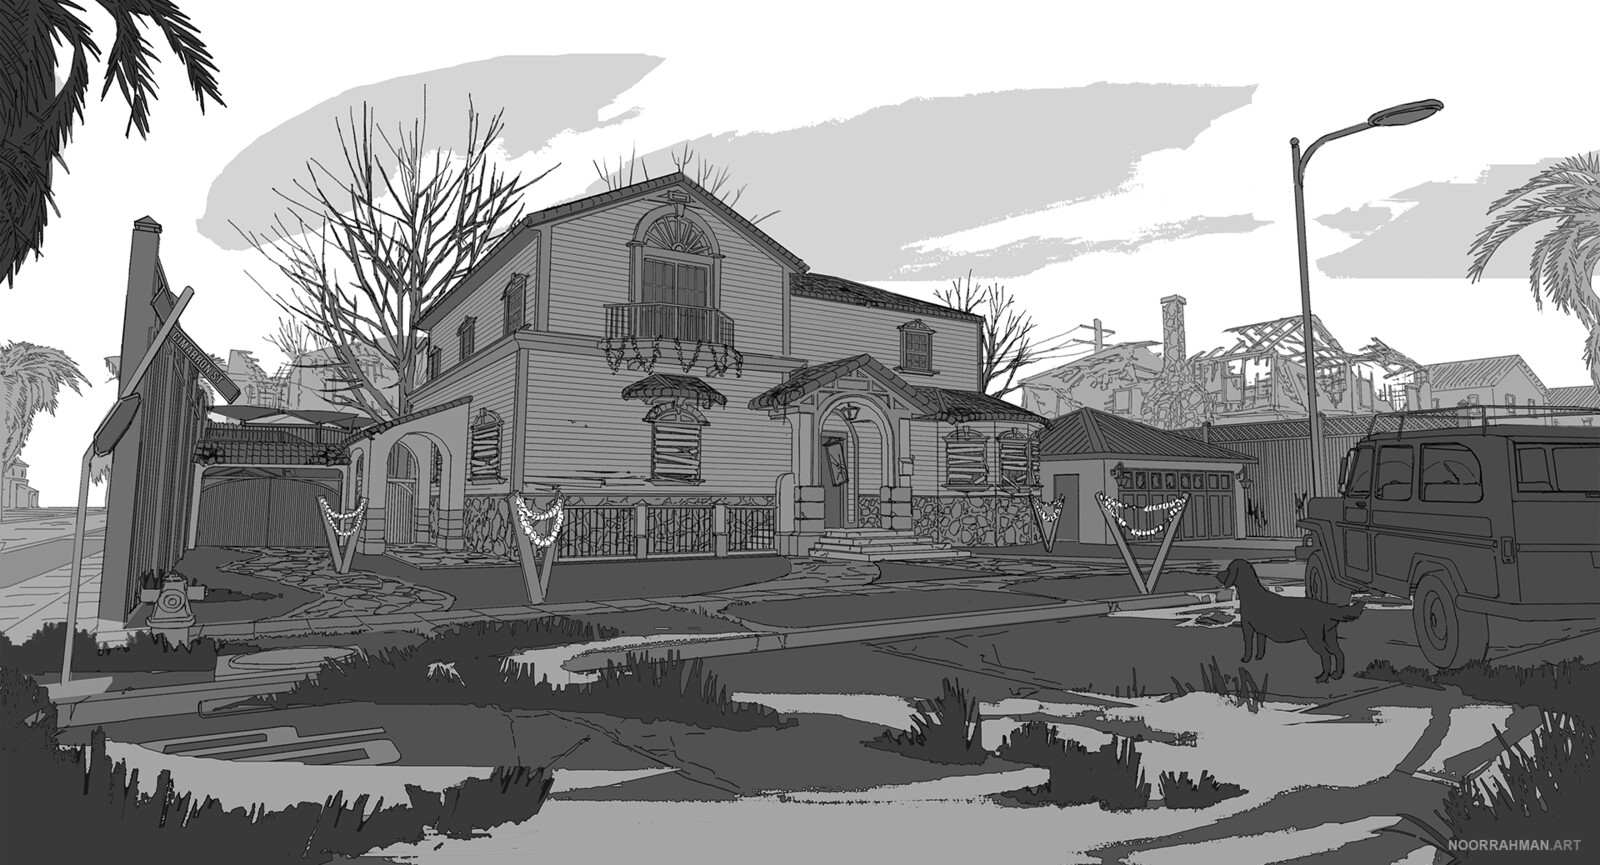 Background layout. Lineart &amp; values over 3D Sketchup model.